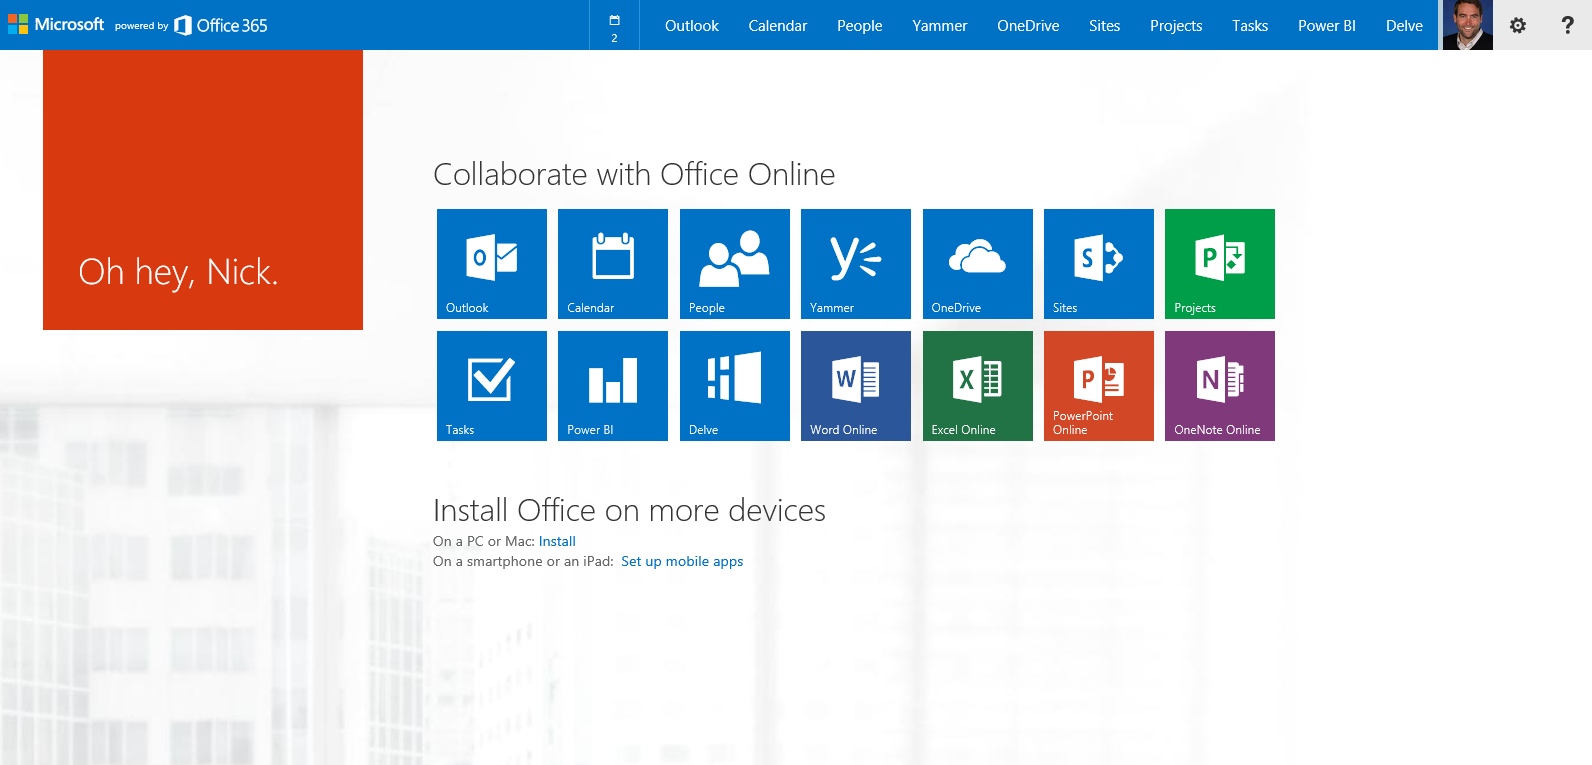 How to deploy Office 365 the right way